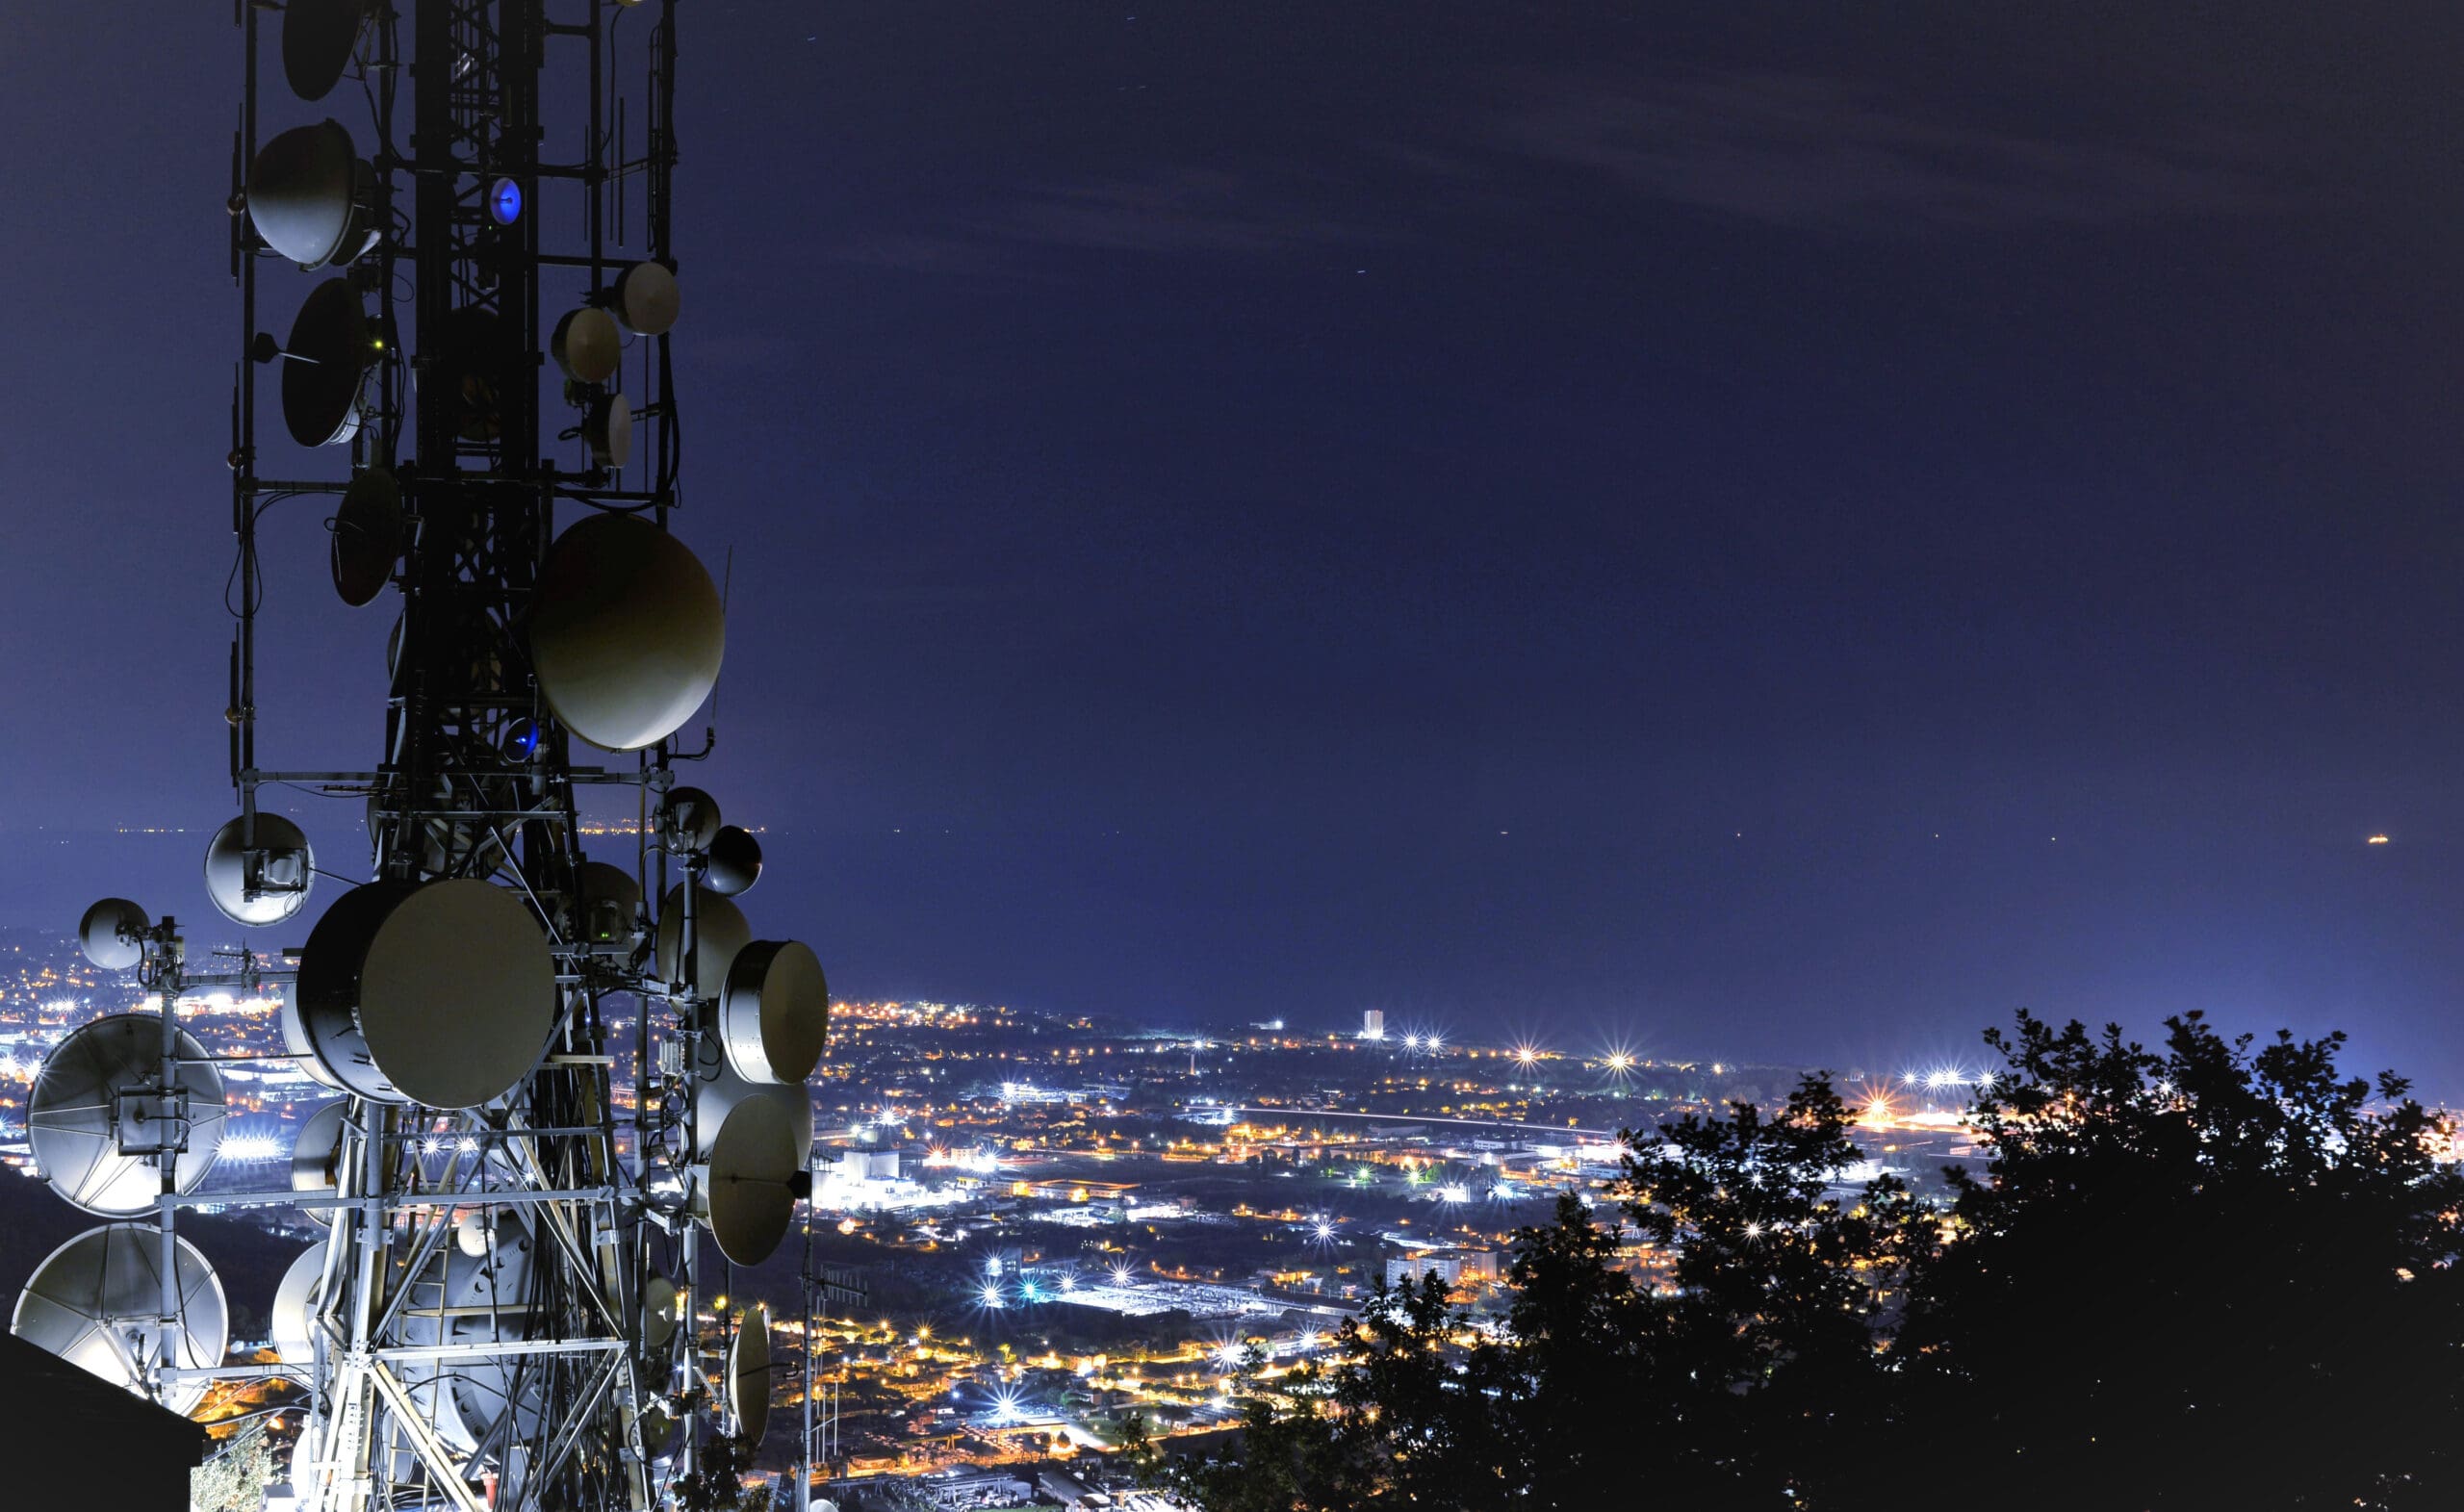 Telecommunications,Tower,,Antenna,And,Satellite,Dish,And,City,At,Night